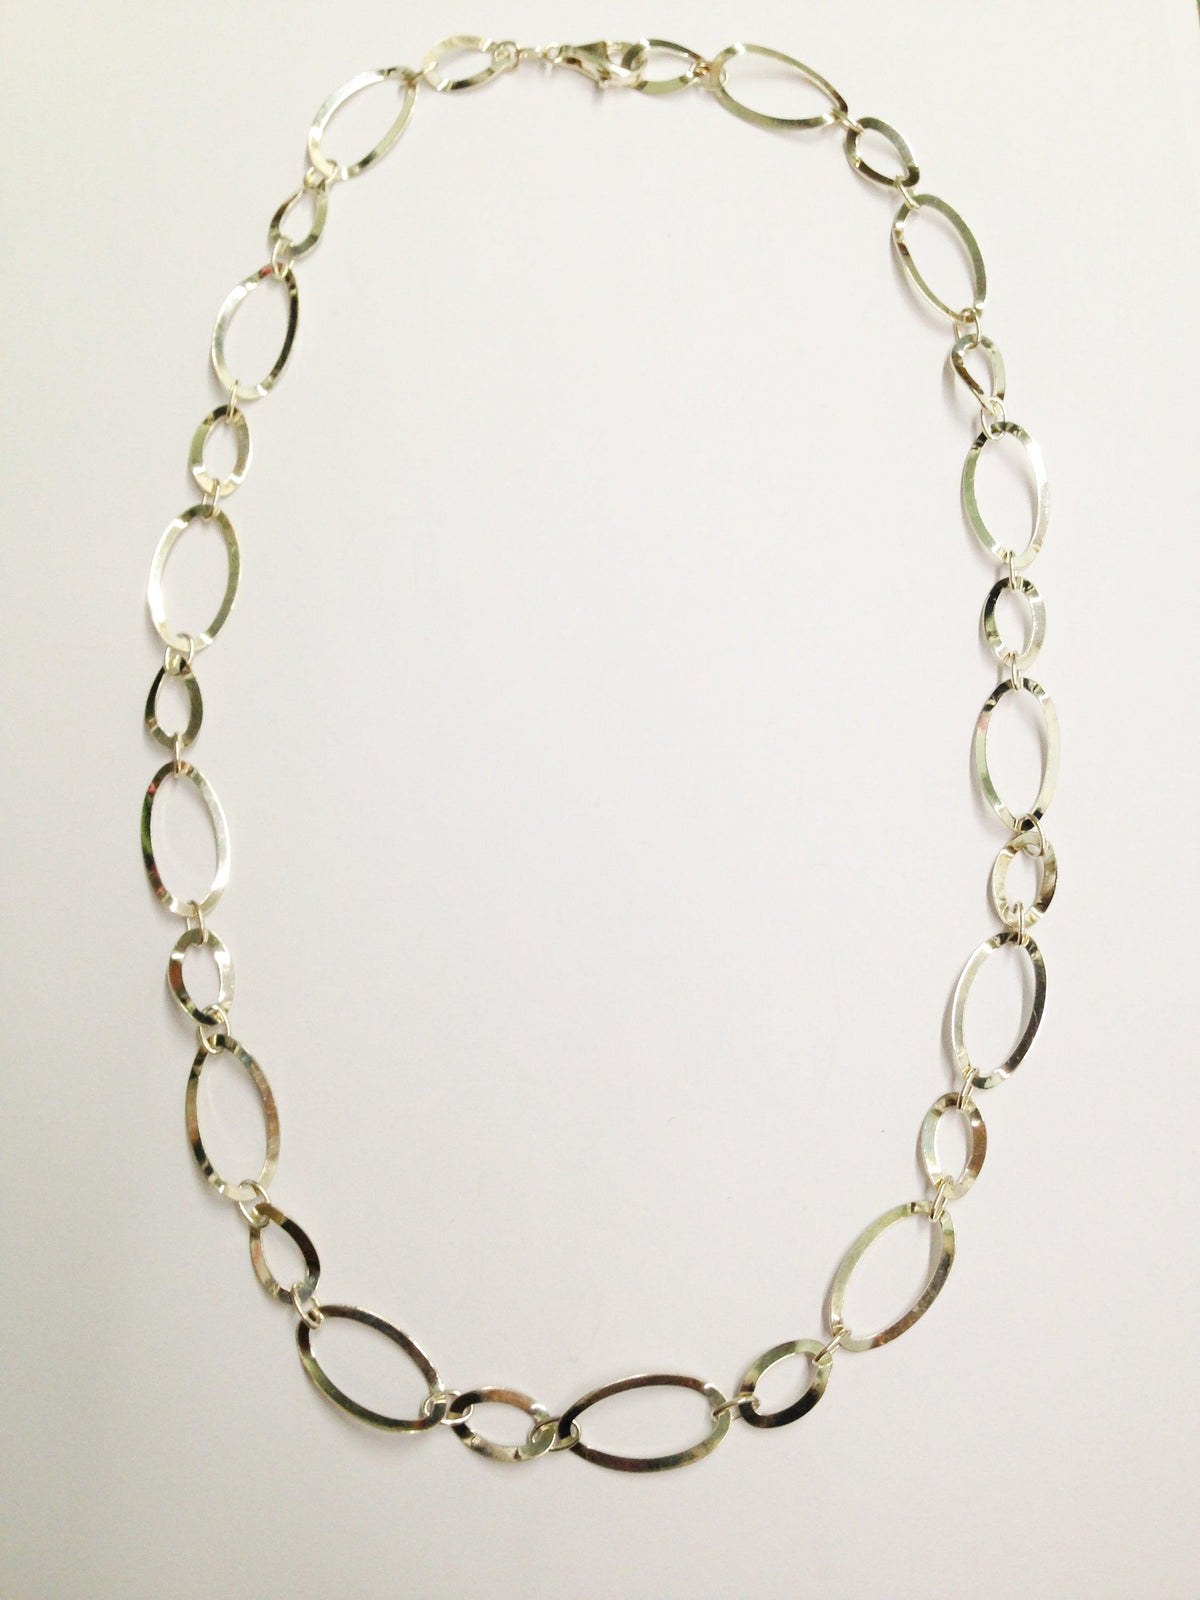 Oval Cable Chain Link Sterling Silver Necklace - Hers and His Treasures